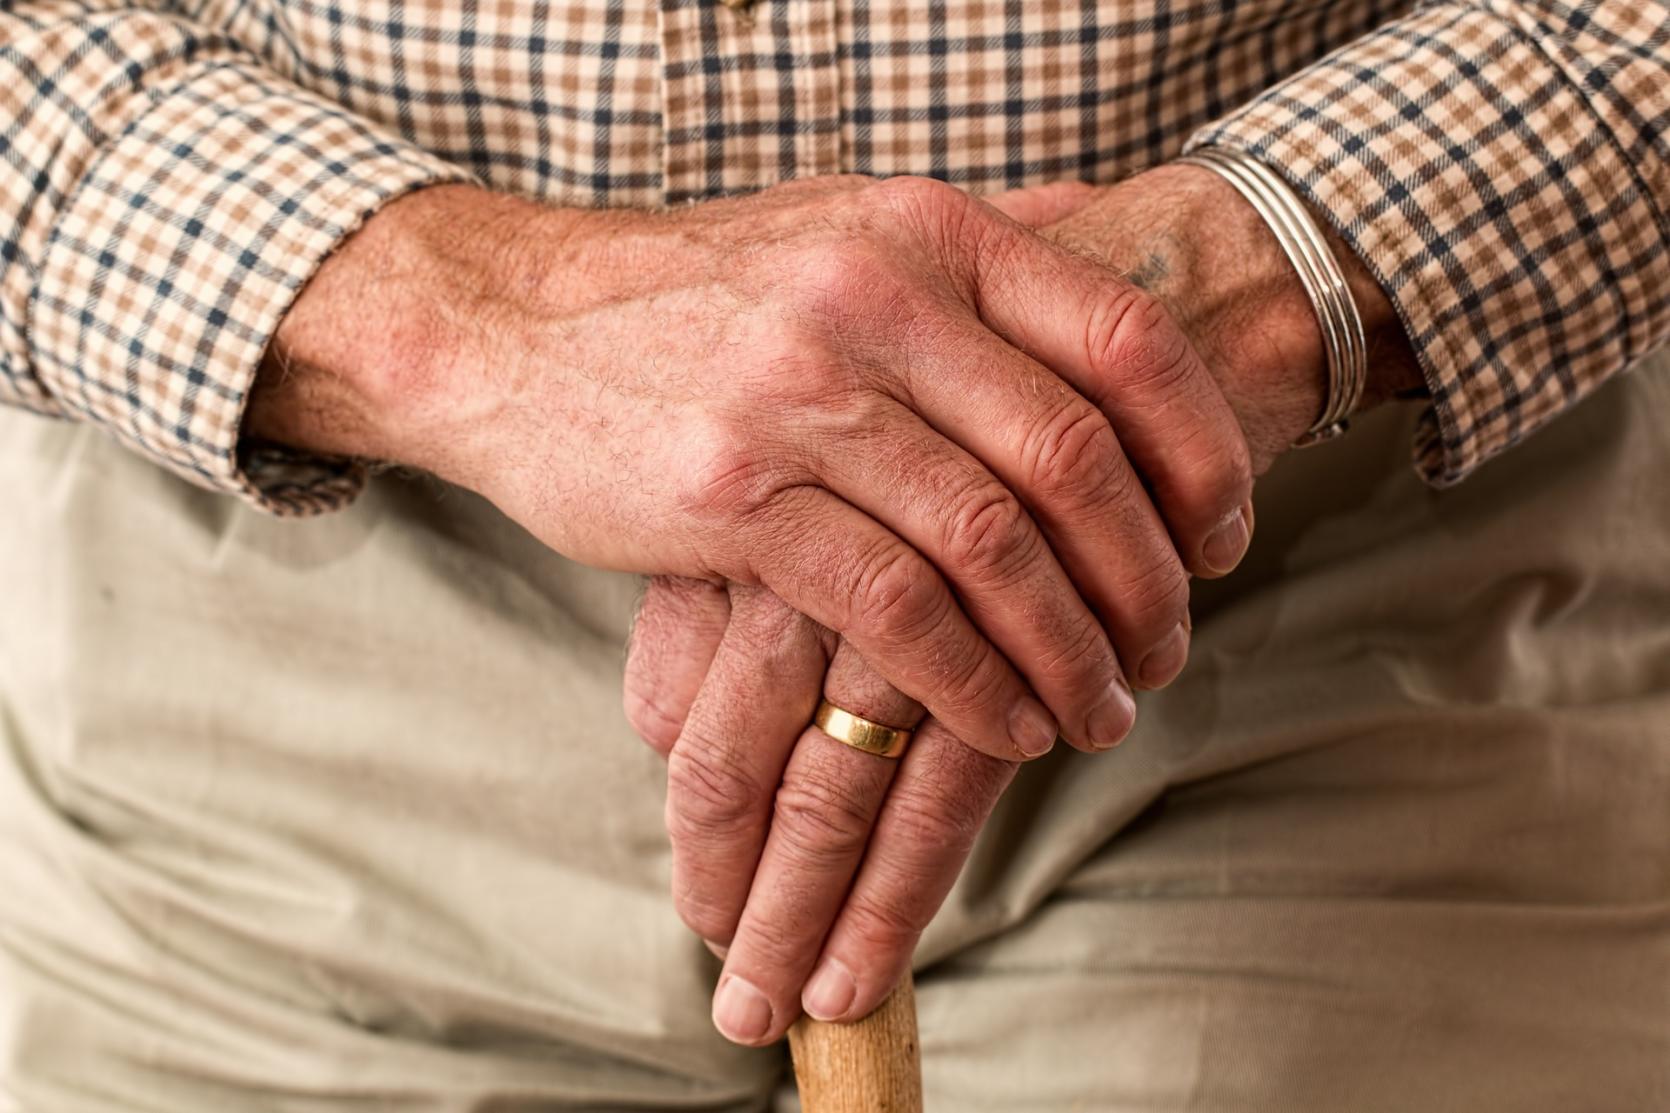 An image of an elderly person's hands.